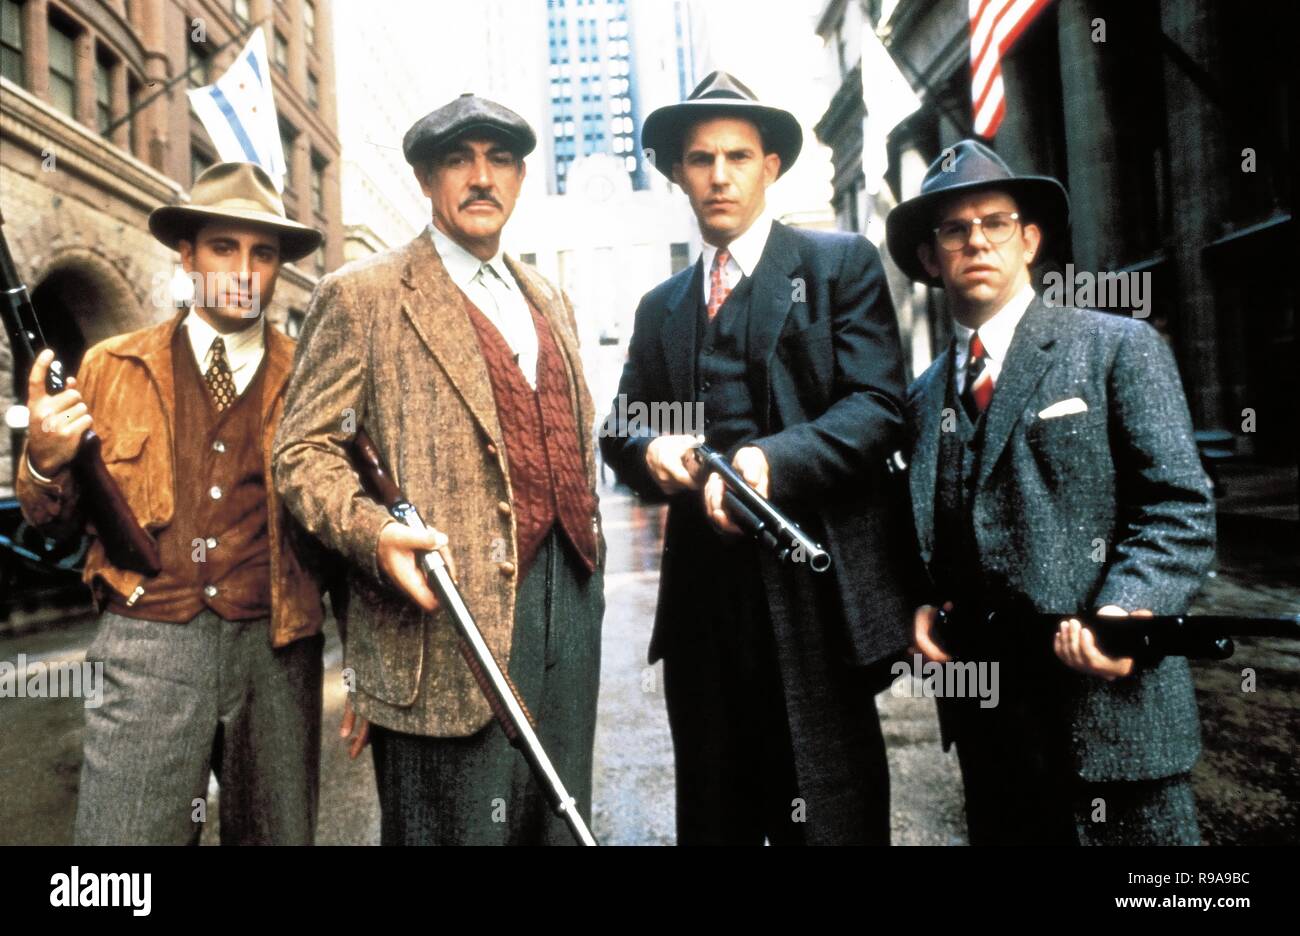 Original film title: THE UNTOUCHABLES. English title: THE UNTOUCHABLES. Year: 1987. Director: BRIAN DE PALMA. Stars: SEAN CONNERY; KEVIN COSTNER; ANDY GARCIA. Credit: PARAMOUNT PICTURES / Album Stock Photo